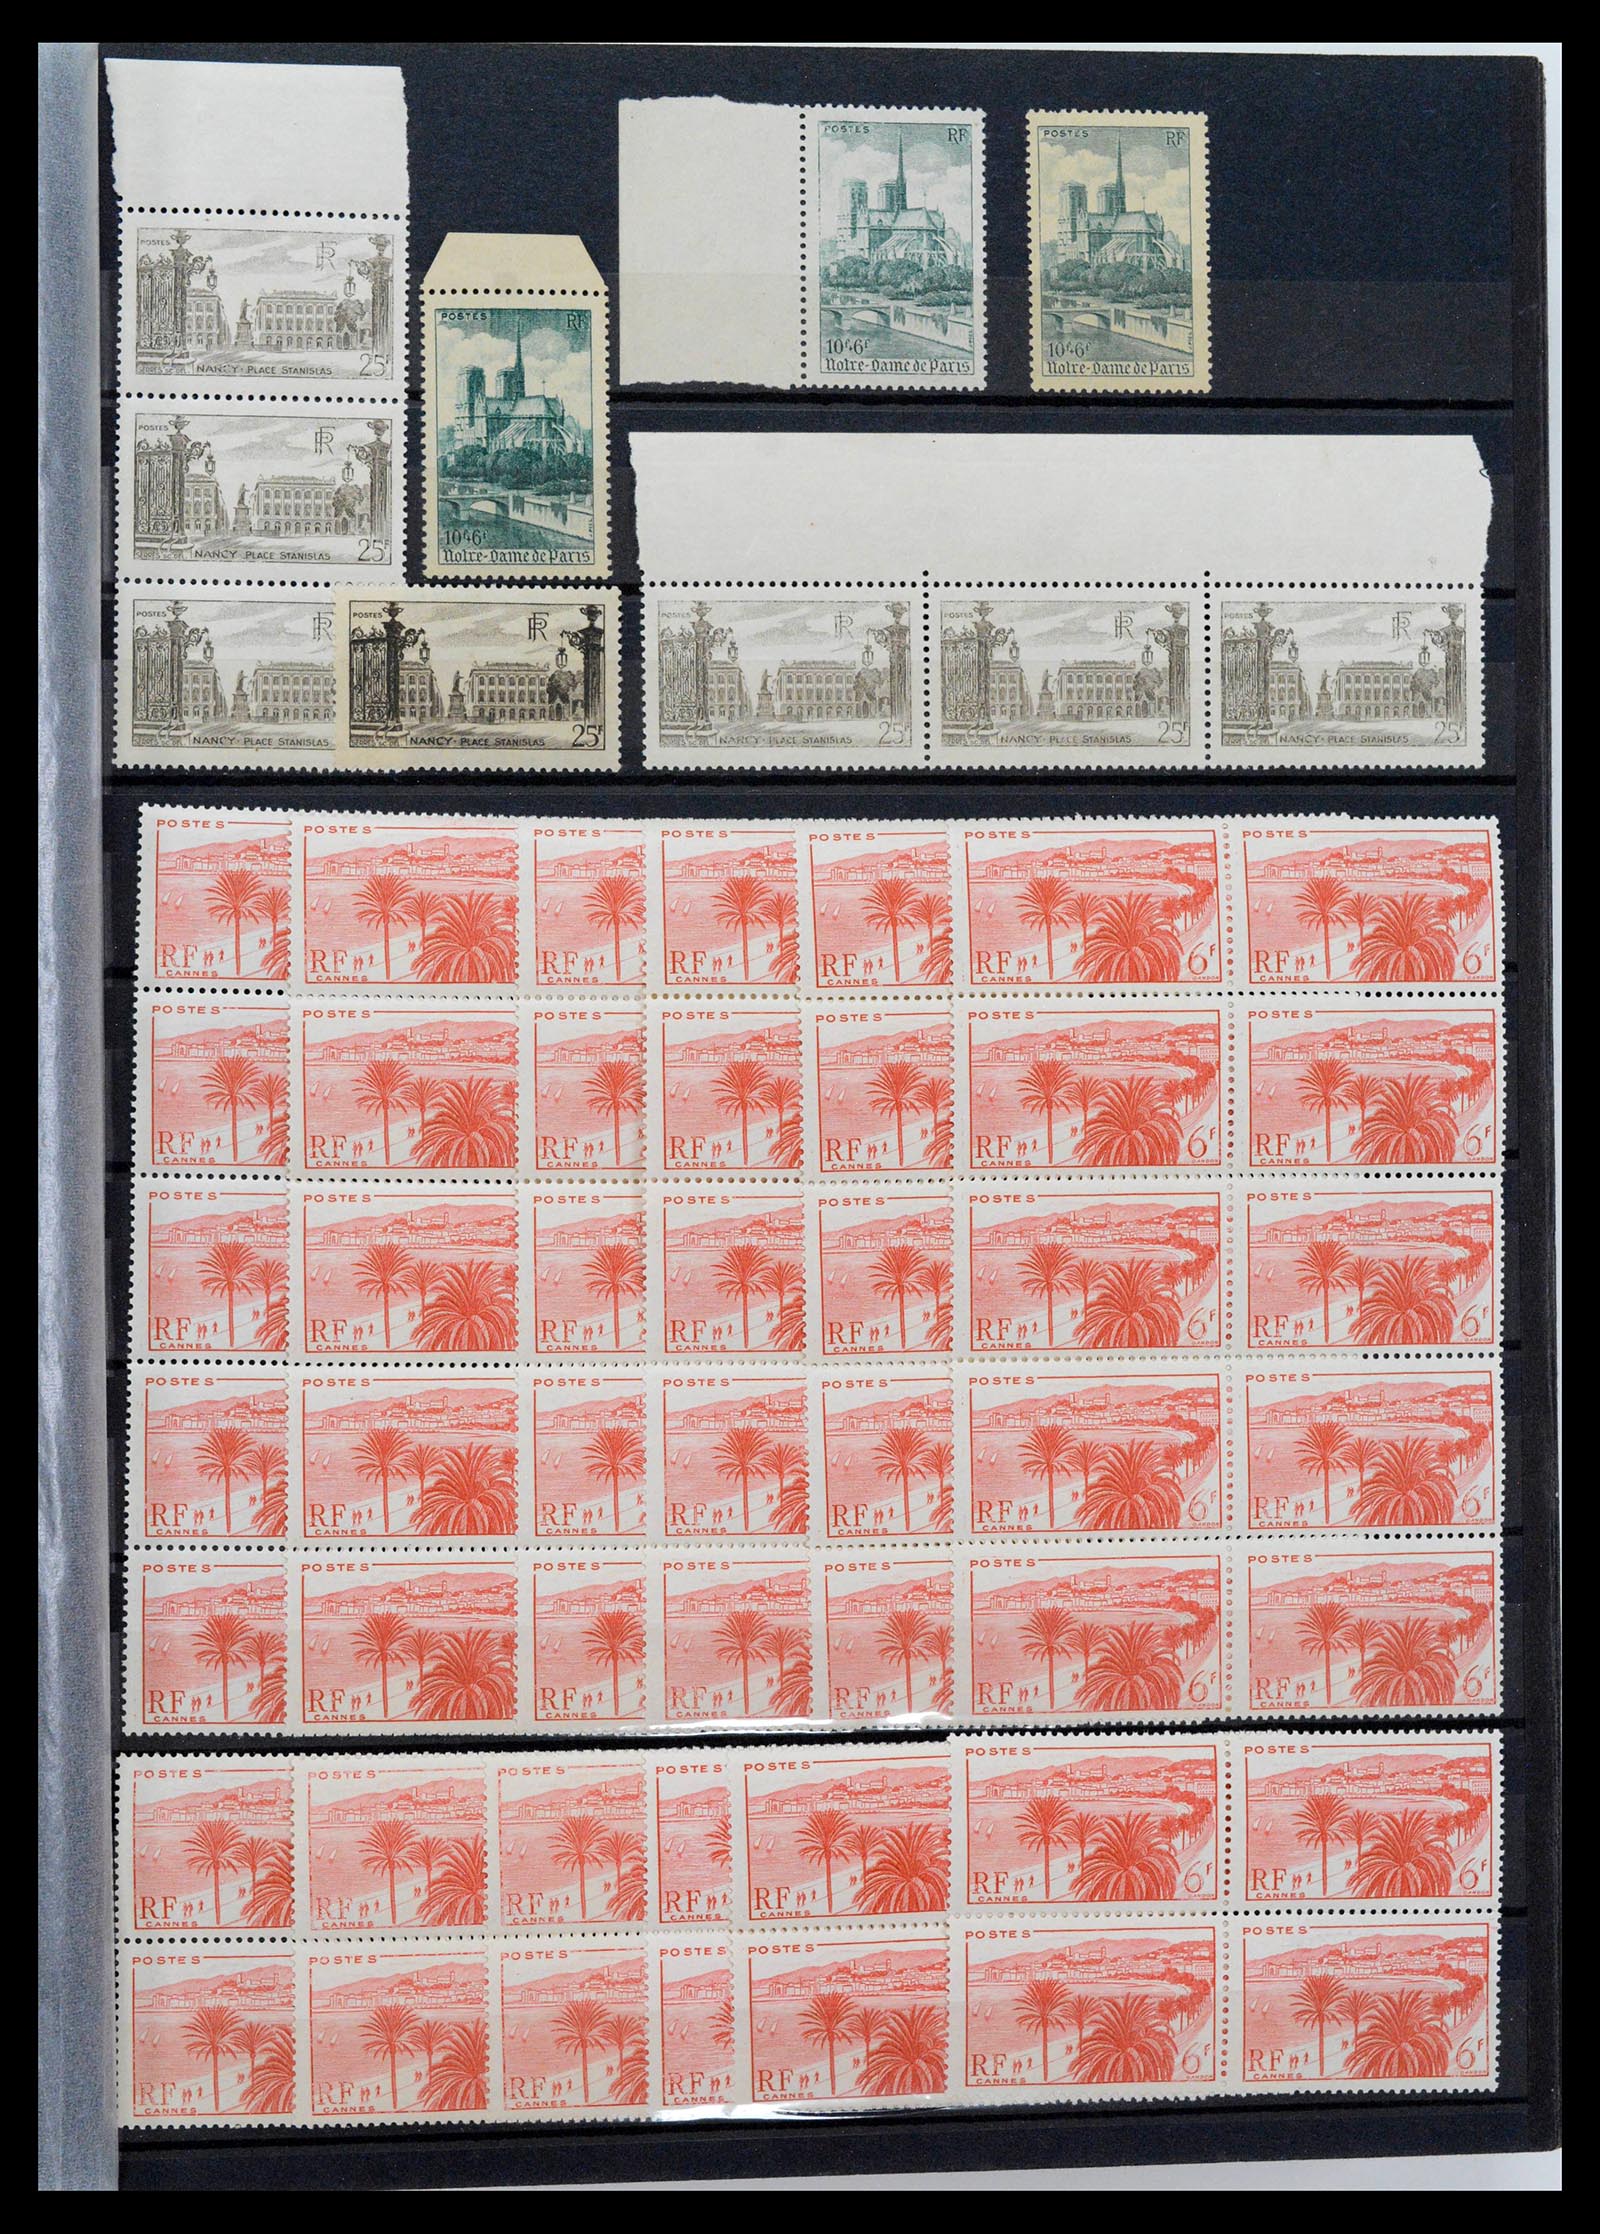 39423 0011 - Stamp collection 39423 France varieties 1862-1985.